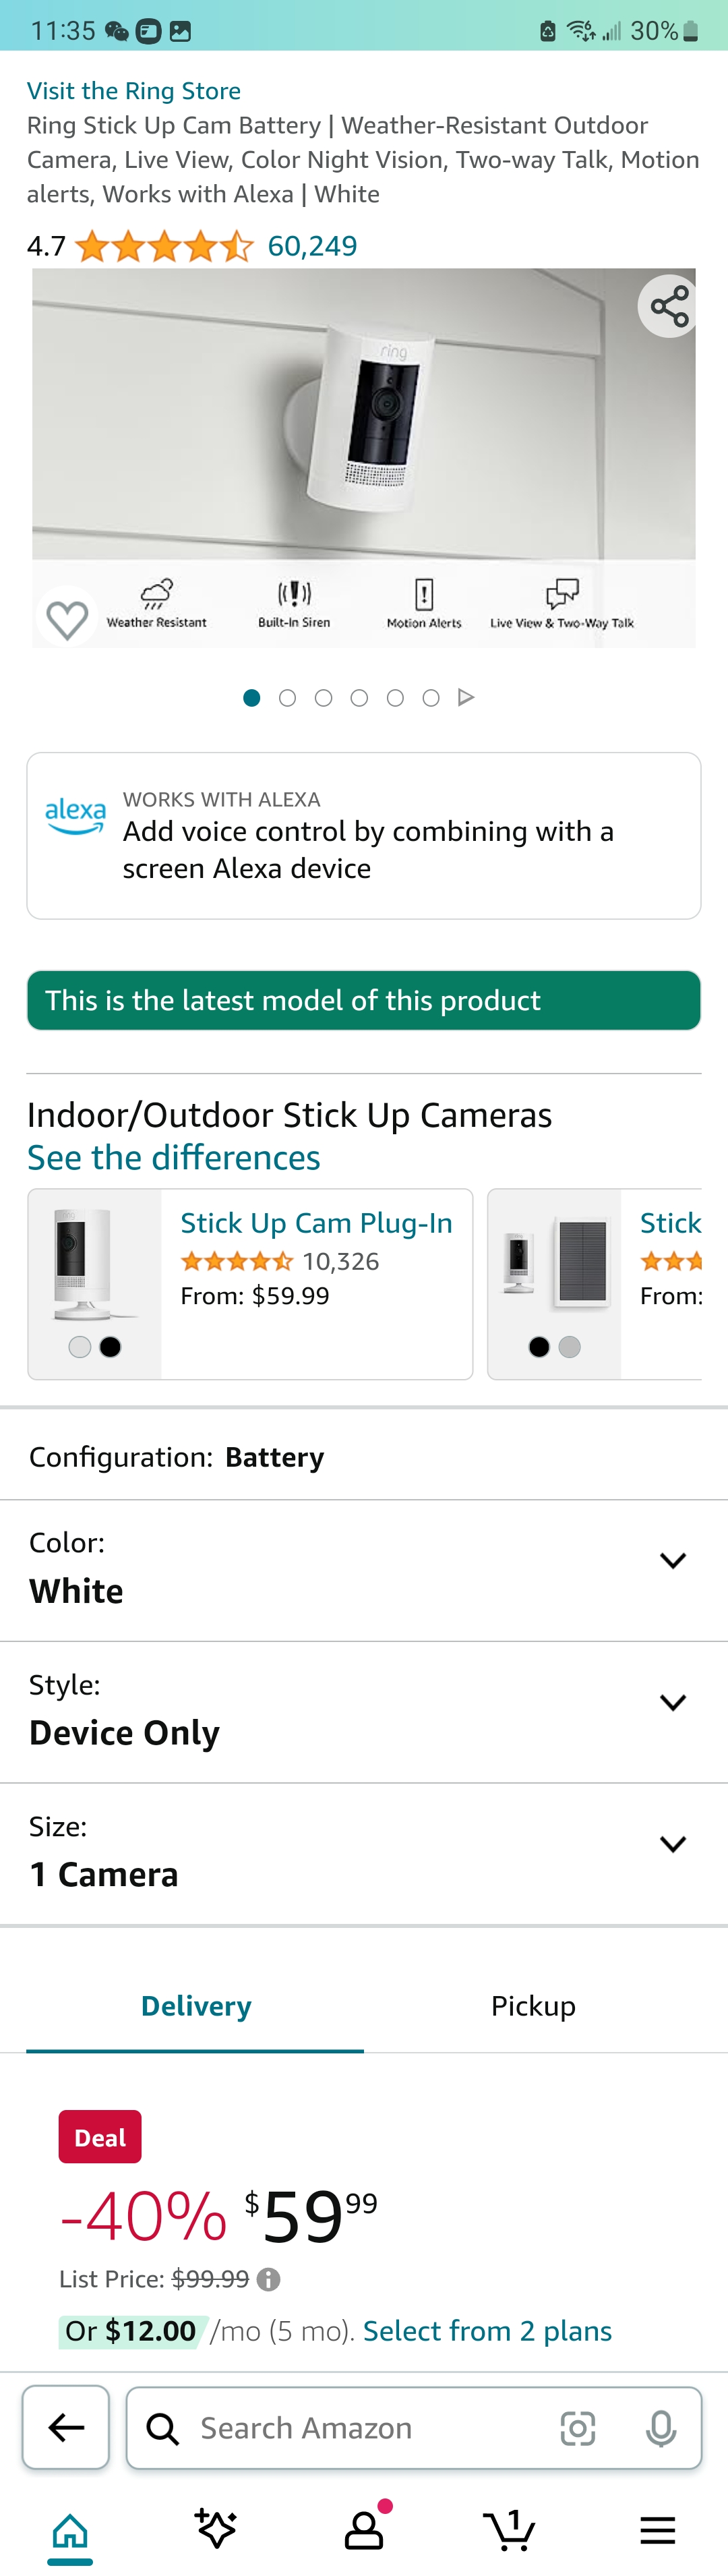 Ring Stick Up Cam Battery HD security camera with custom privacy controls, Simple setup, Works with Alexa - White : Electronics